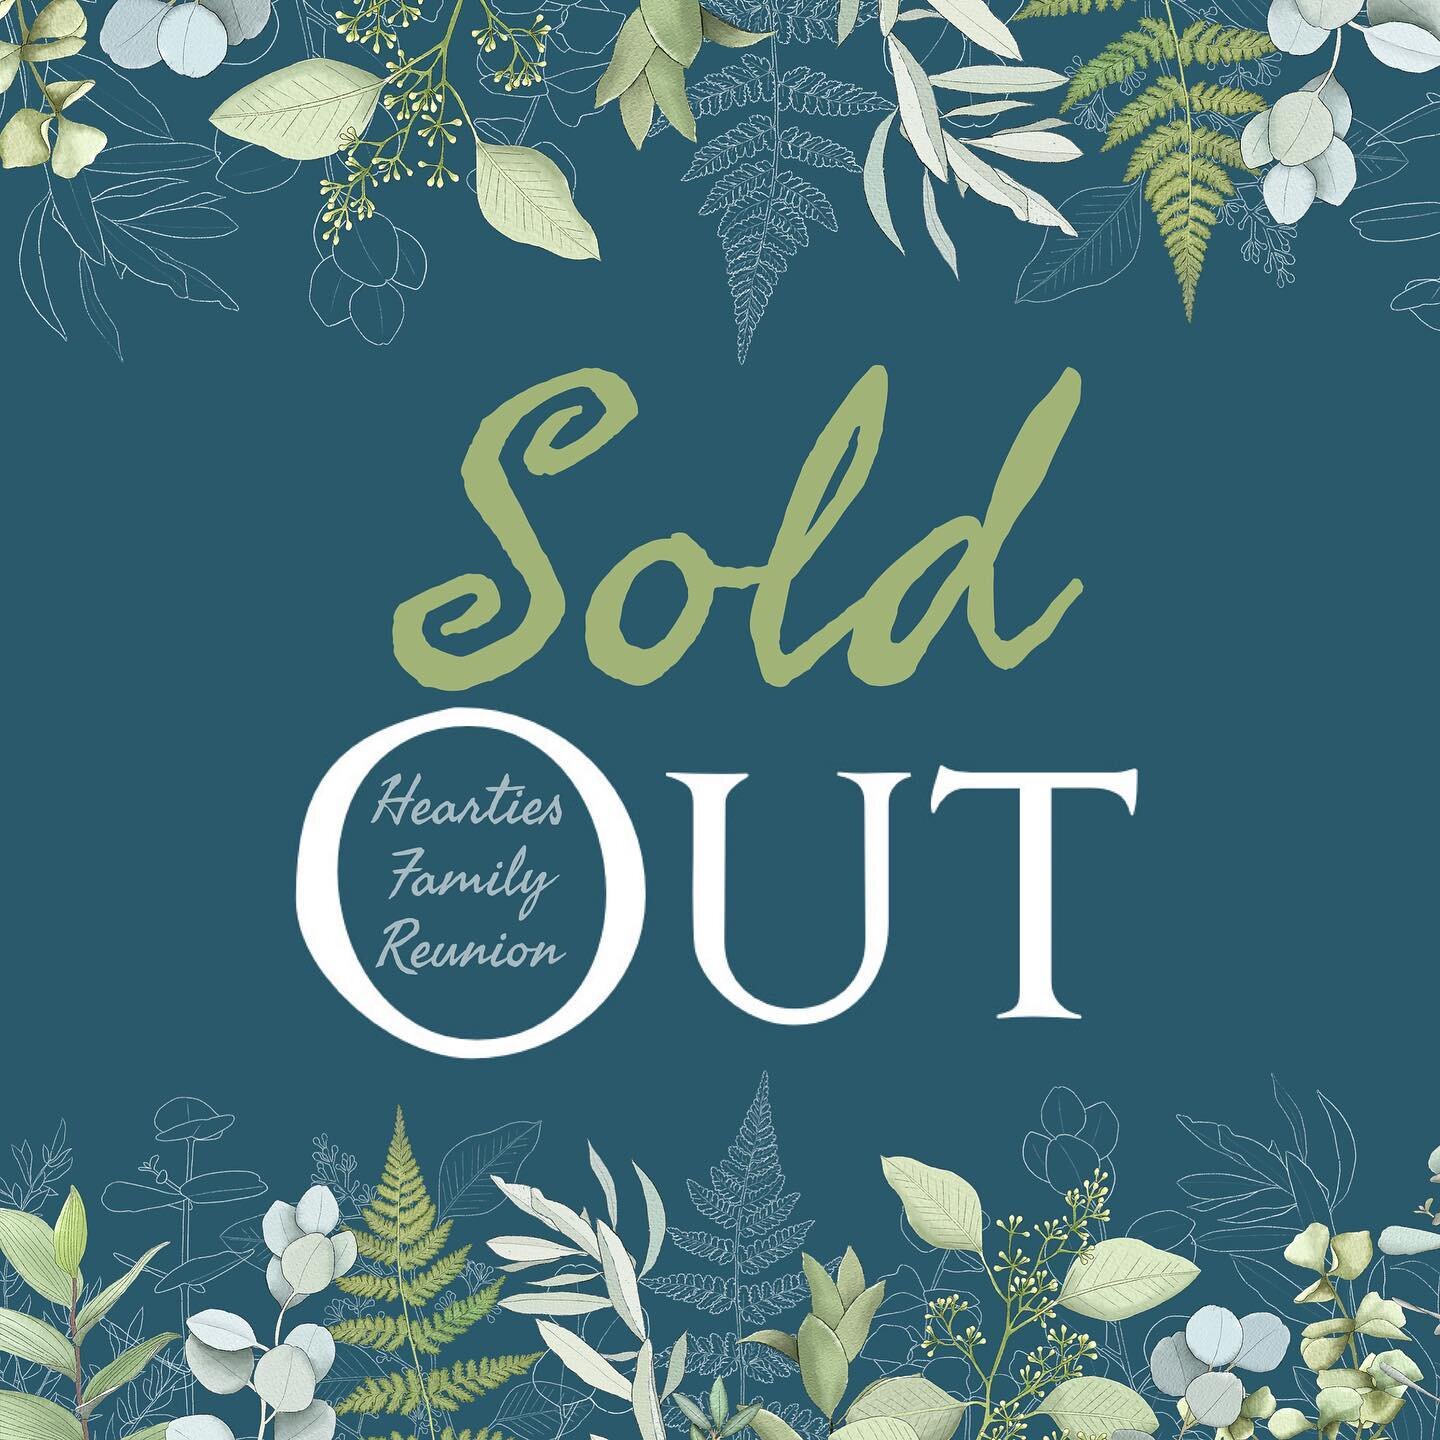 ❤️ HFR NEWS - SOLD OUT!!! ❤️

The next #Hearties Family Reunion, #HFR2023, which will take place in Vancouver, British Columbus, Canada, September 22-24, 2023 is now SOLD OUT!  Thanks to all the Hearties who entered the Opportunity Drawing!! Congratu